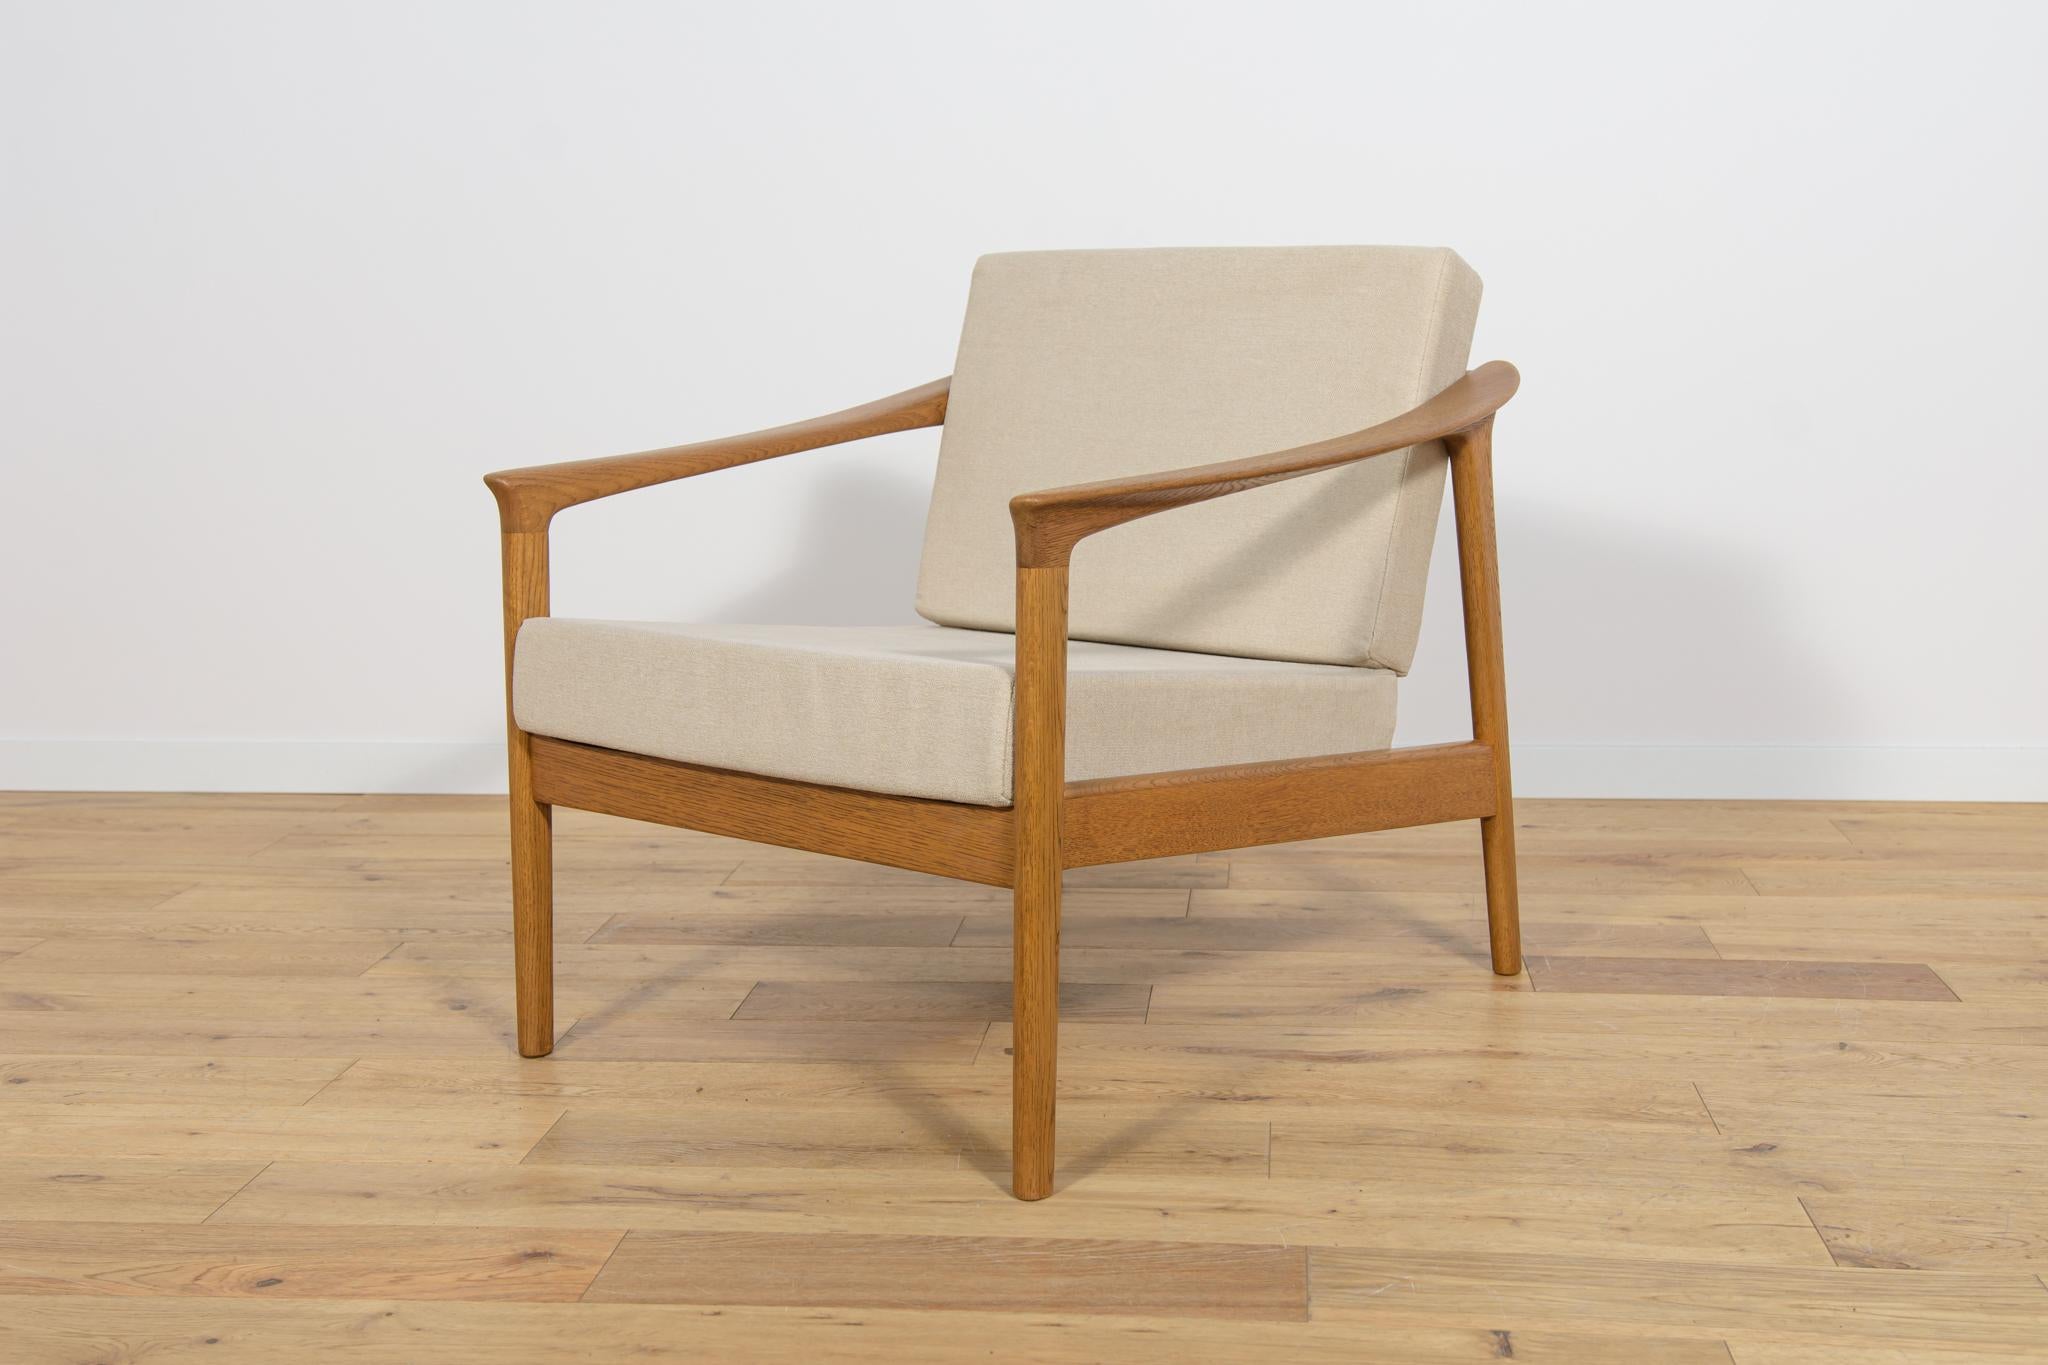 Woodwork Mid Century Sofa and Armchair Monterey /5-161 by Folke Ohlsson for Bodafors. For Sale